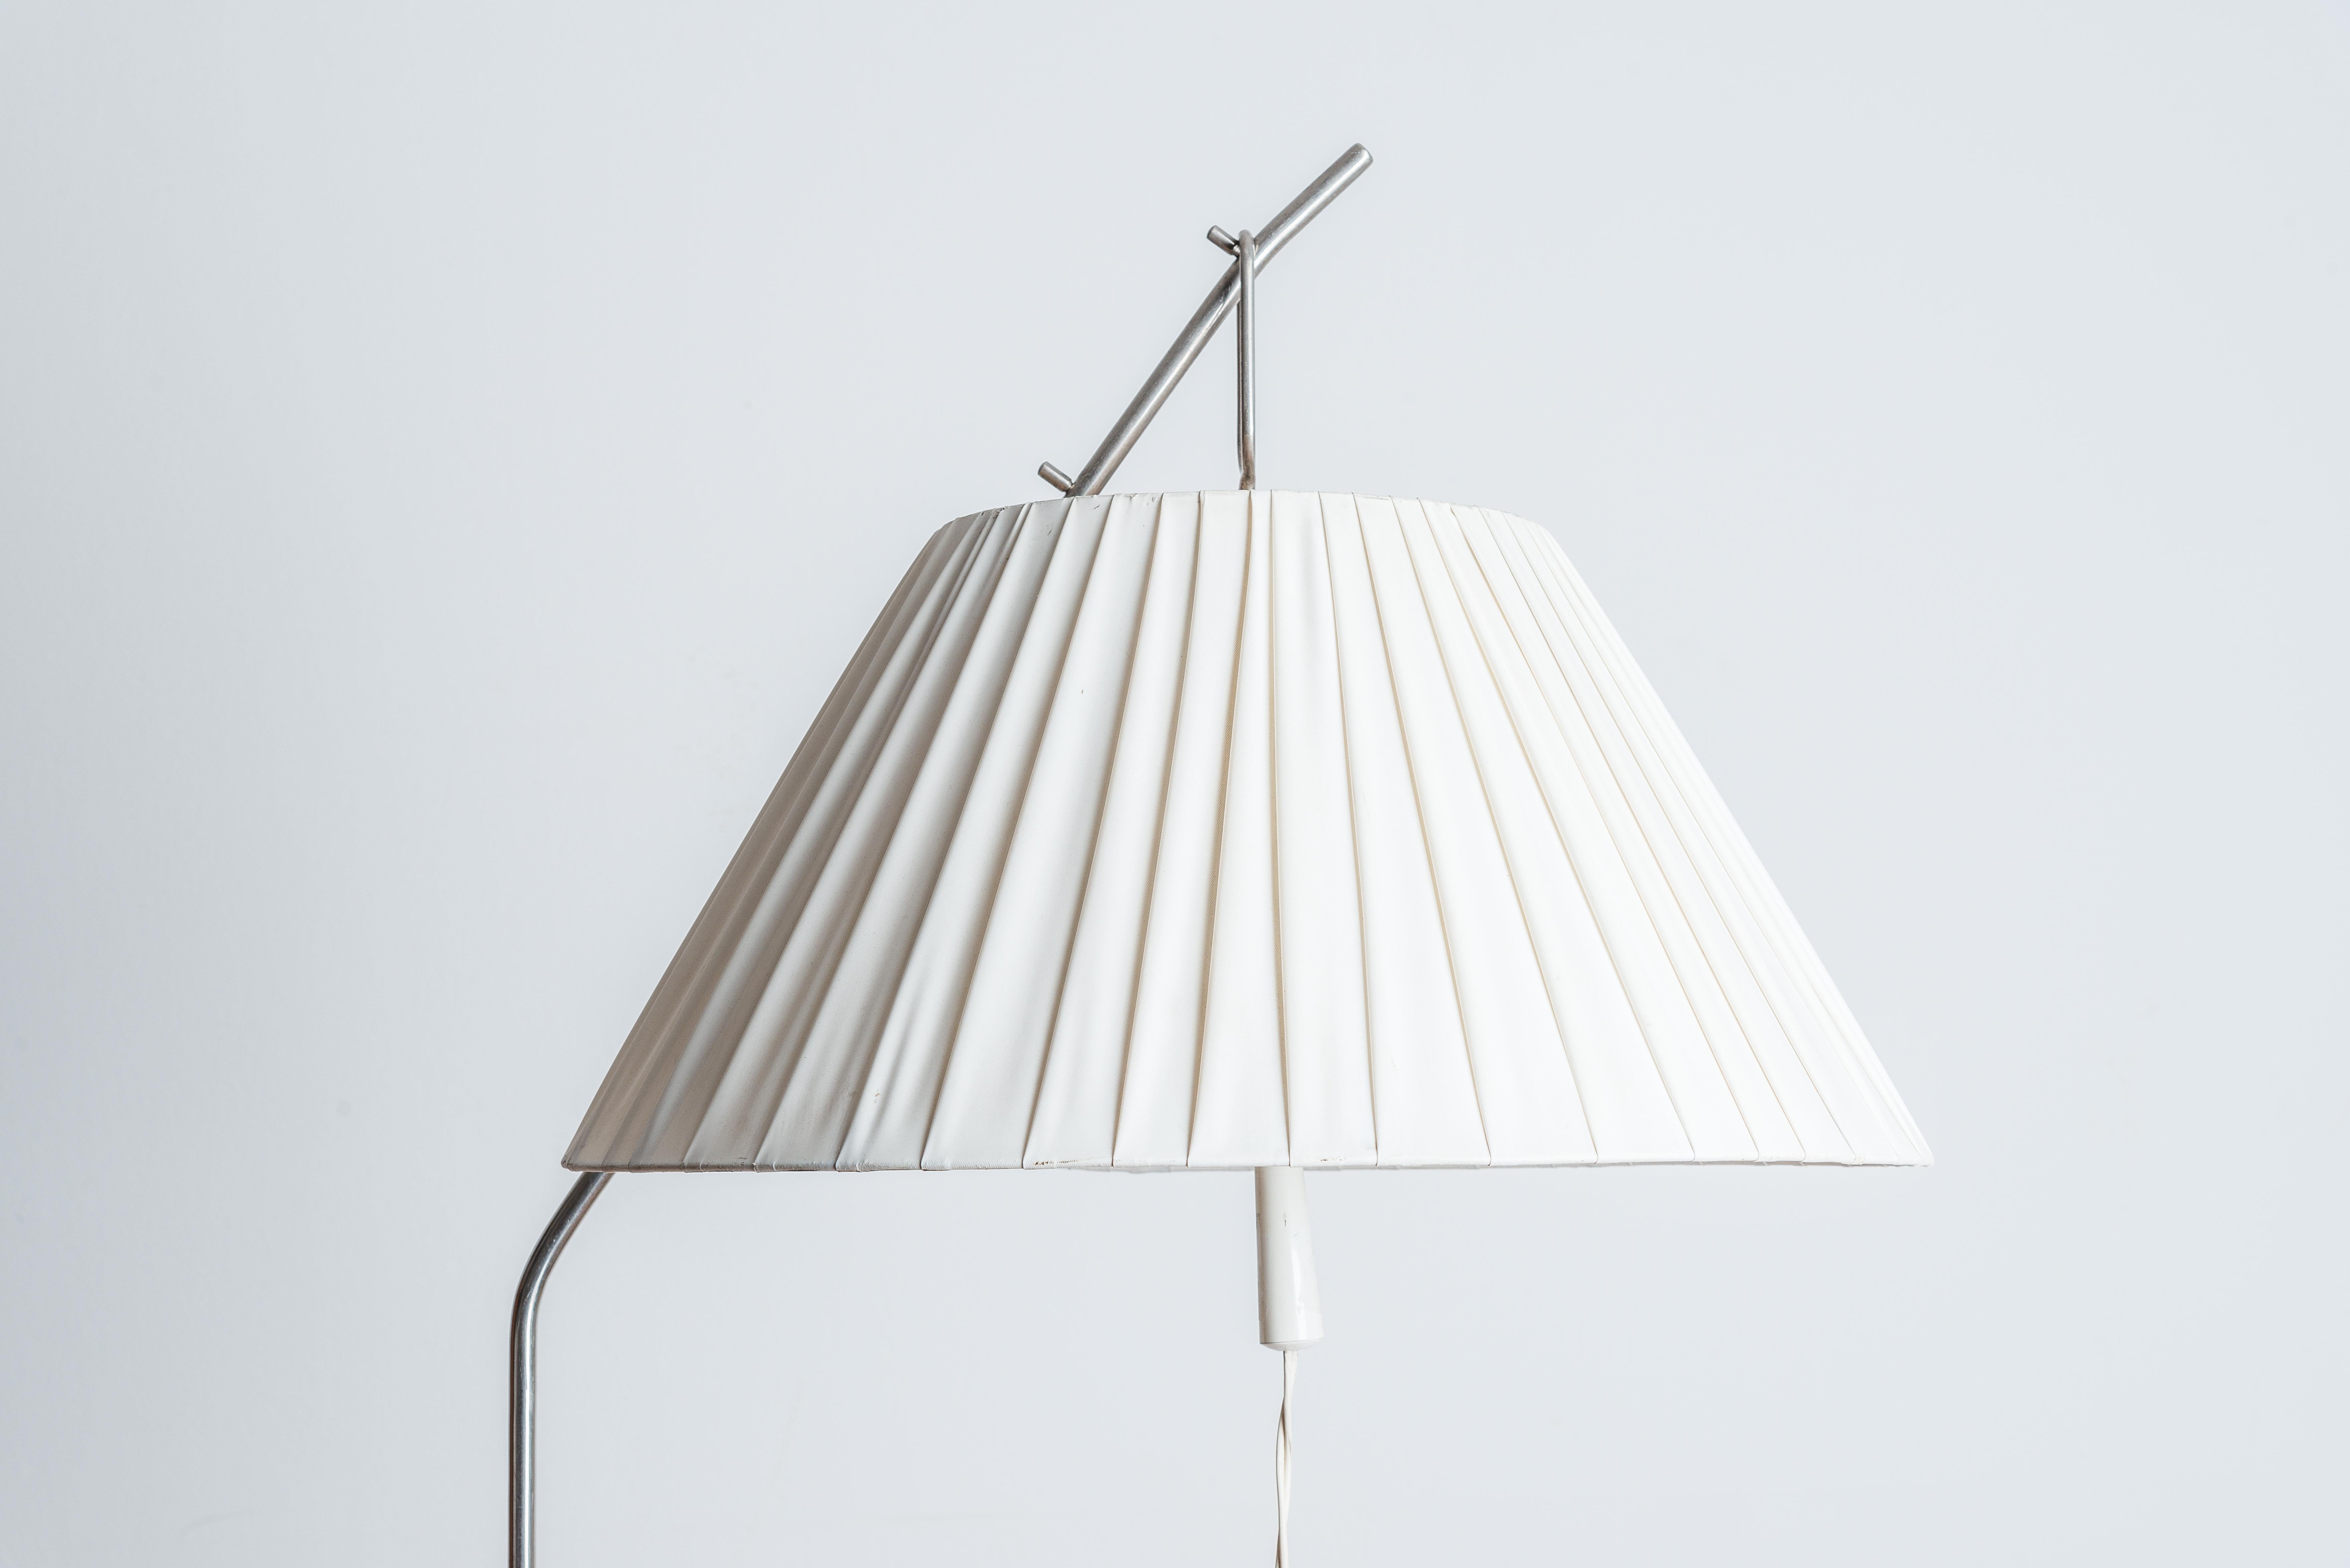 Midcentury white Kalmar-style floor lamp with . Pleated Vinyl Lamp Shade.Country of origin: Poland, made in the 1960s
The shade can be adjusted to 3 different heights using a clever solution of 3 different hooks on the top. 
Excellent design